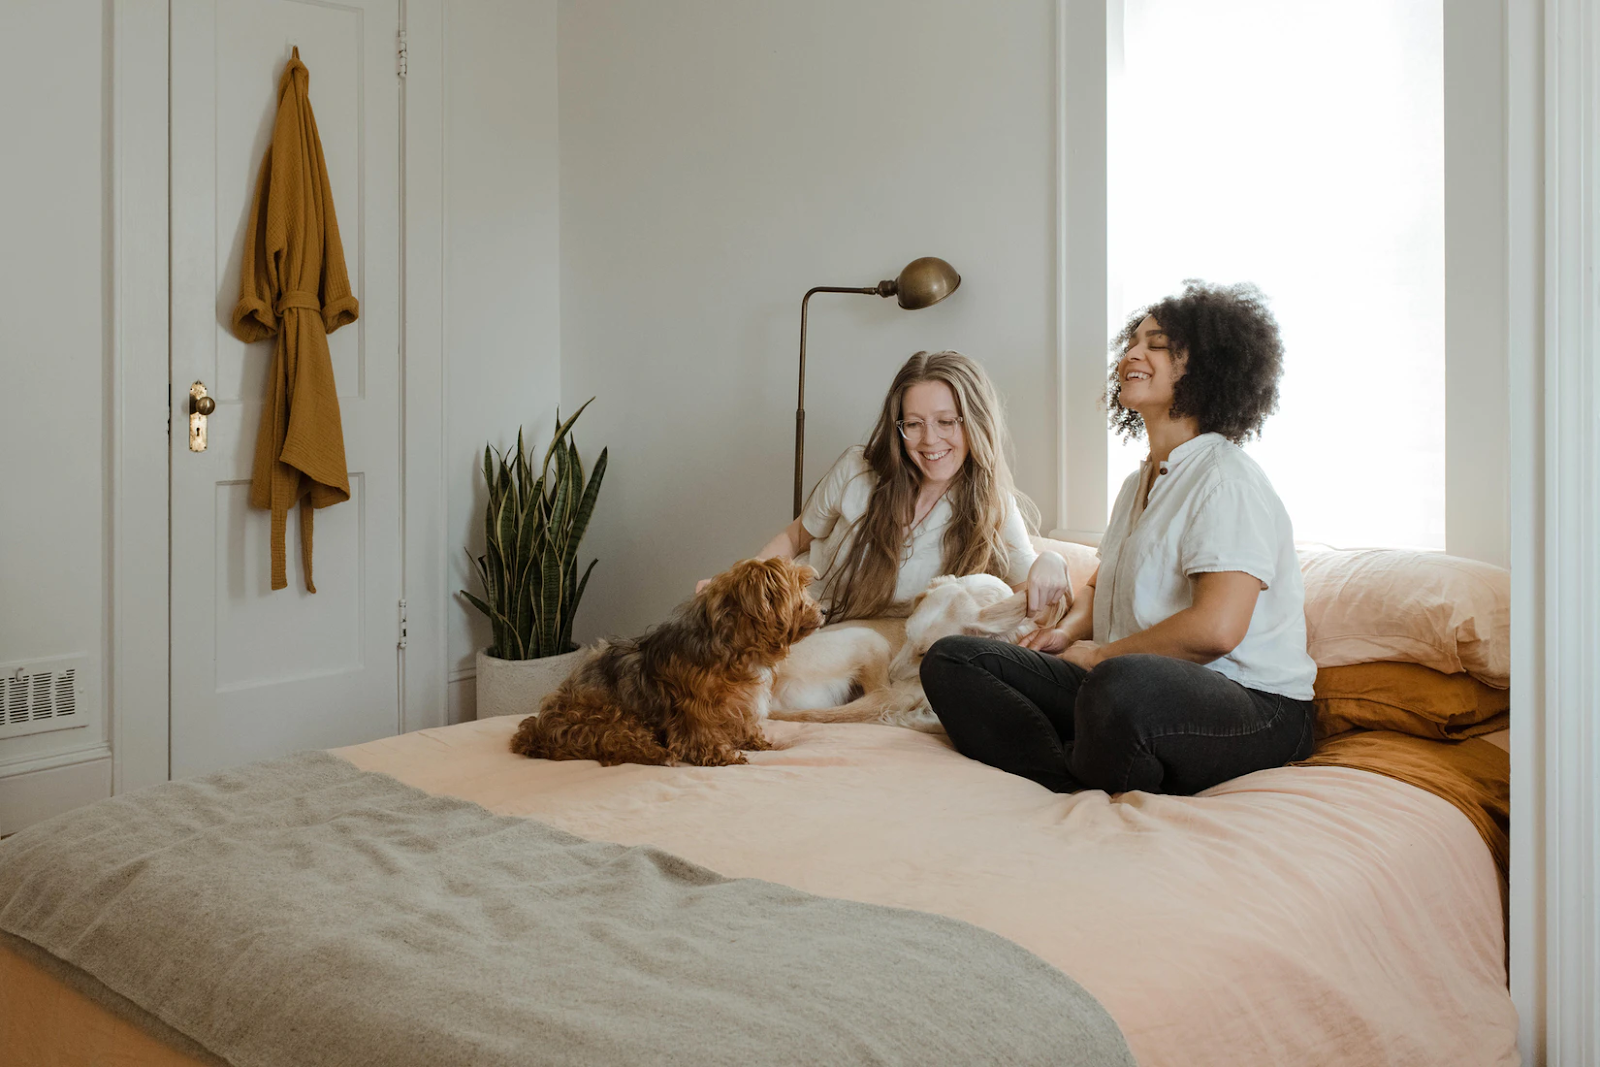 An image of two women sitting on a bed and laughing. One of them is petting a dog that sits beside them.